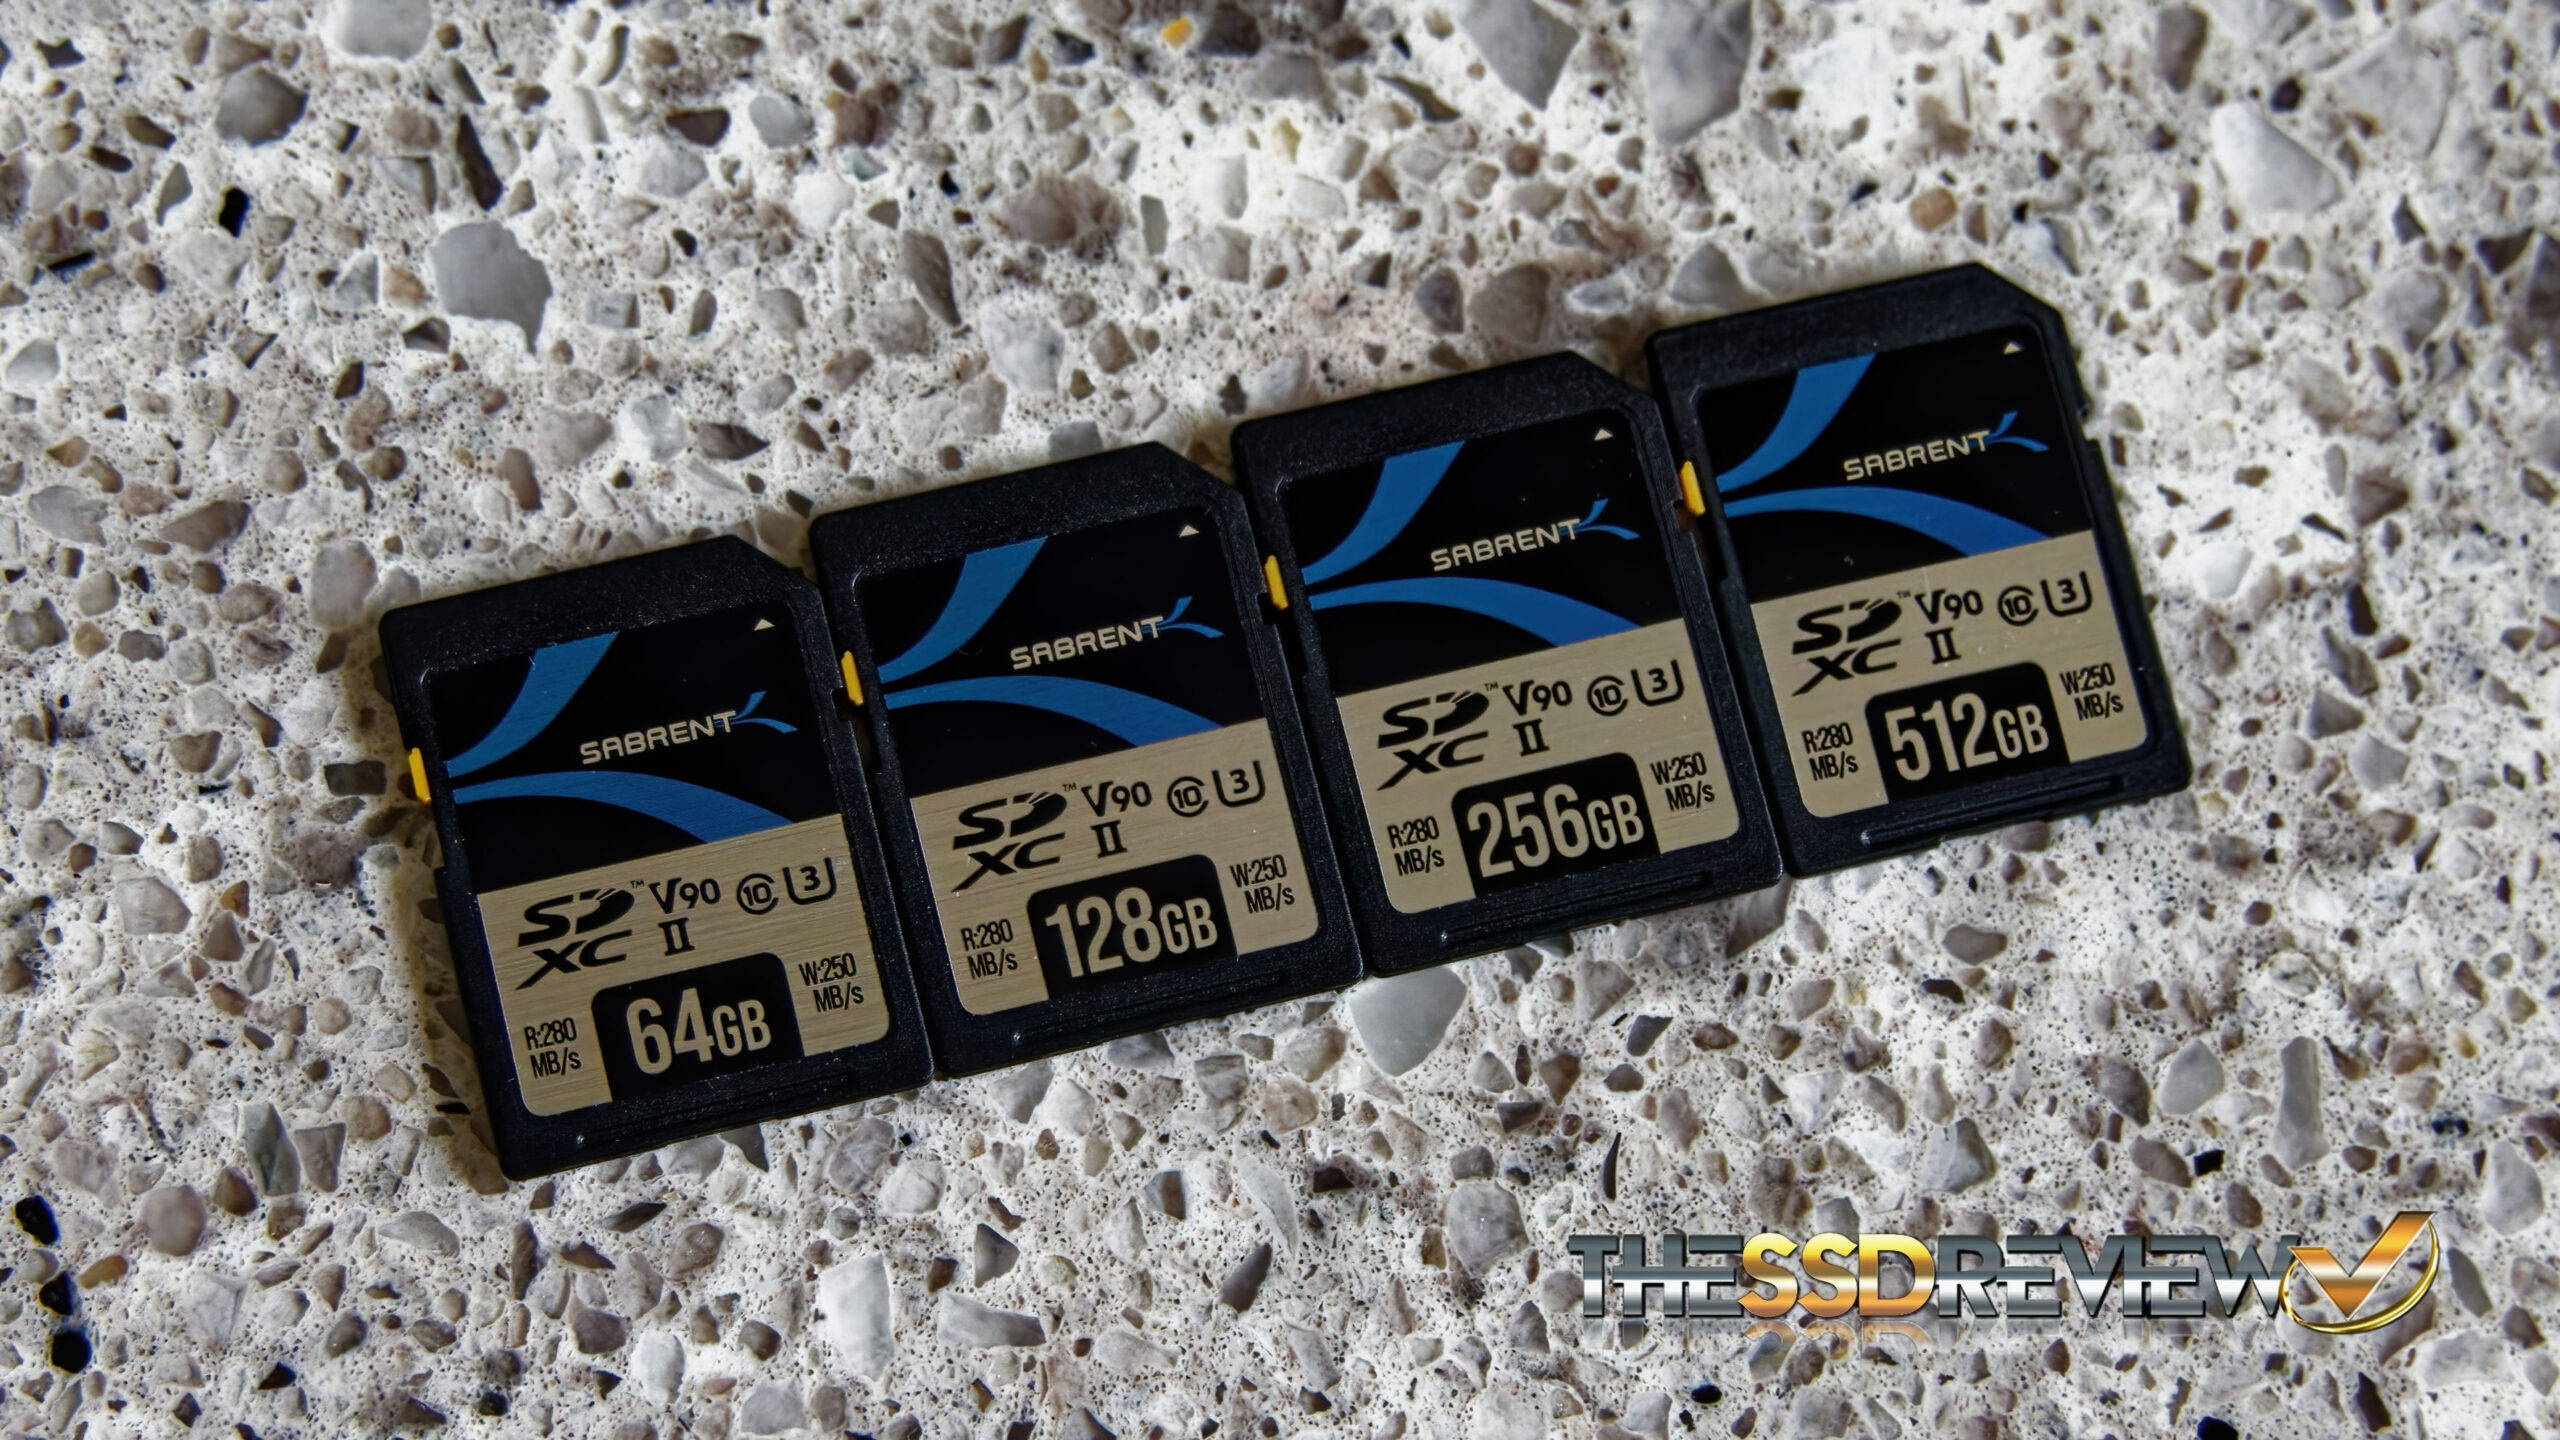 Sabrent, Wise unveil world's first 512GB V90 SDXC cards for $600 and $800,  respectively: Digital Photography Review